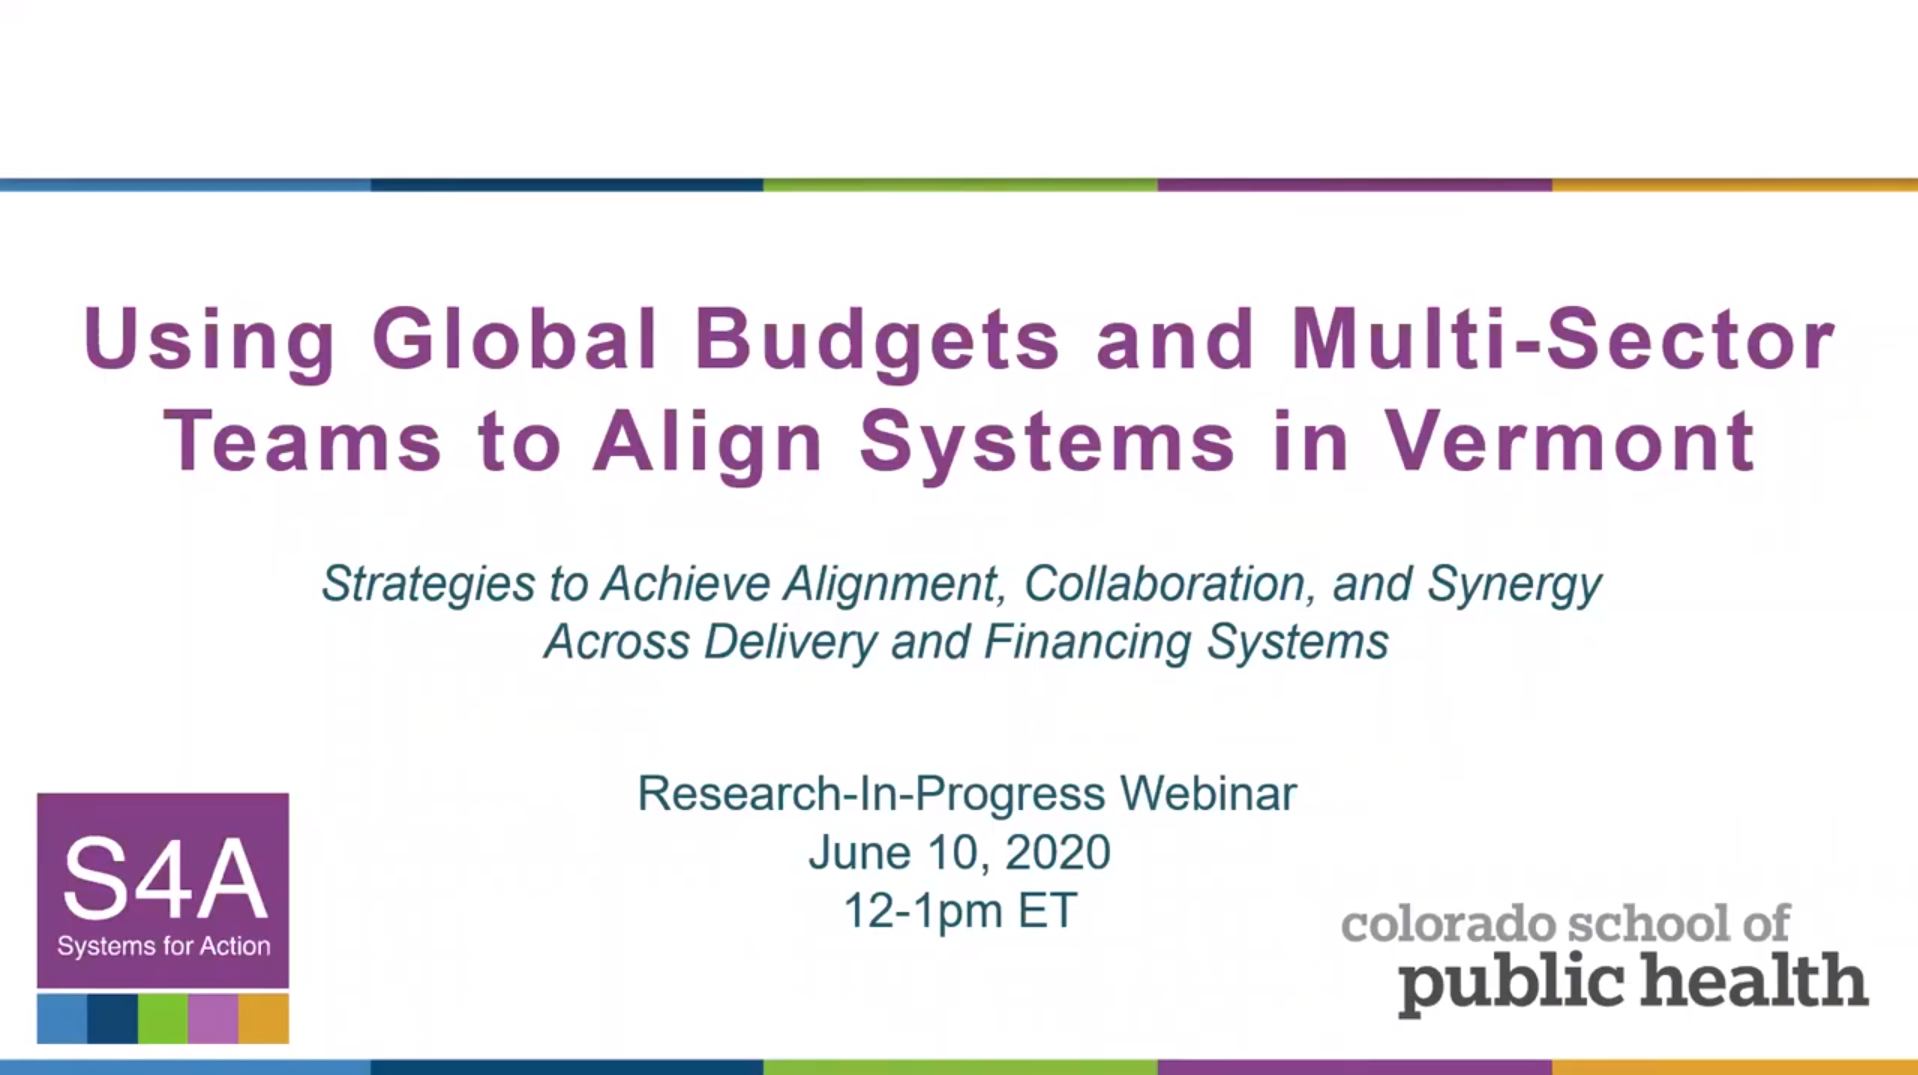 Using Global Budgets and Multi-Sector Teams to Align Systems in Vermont